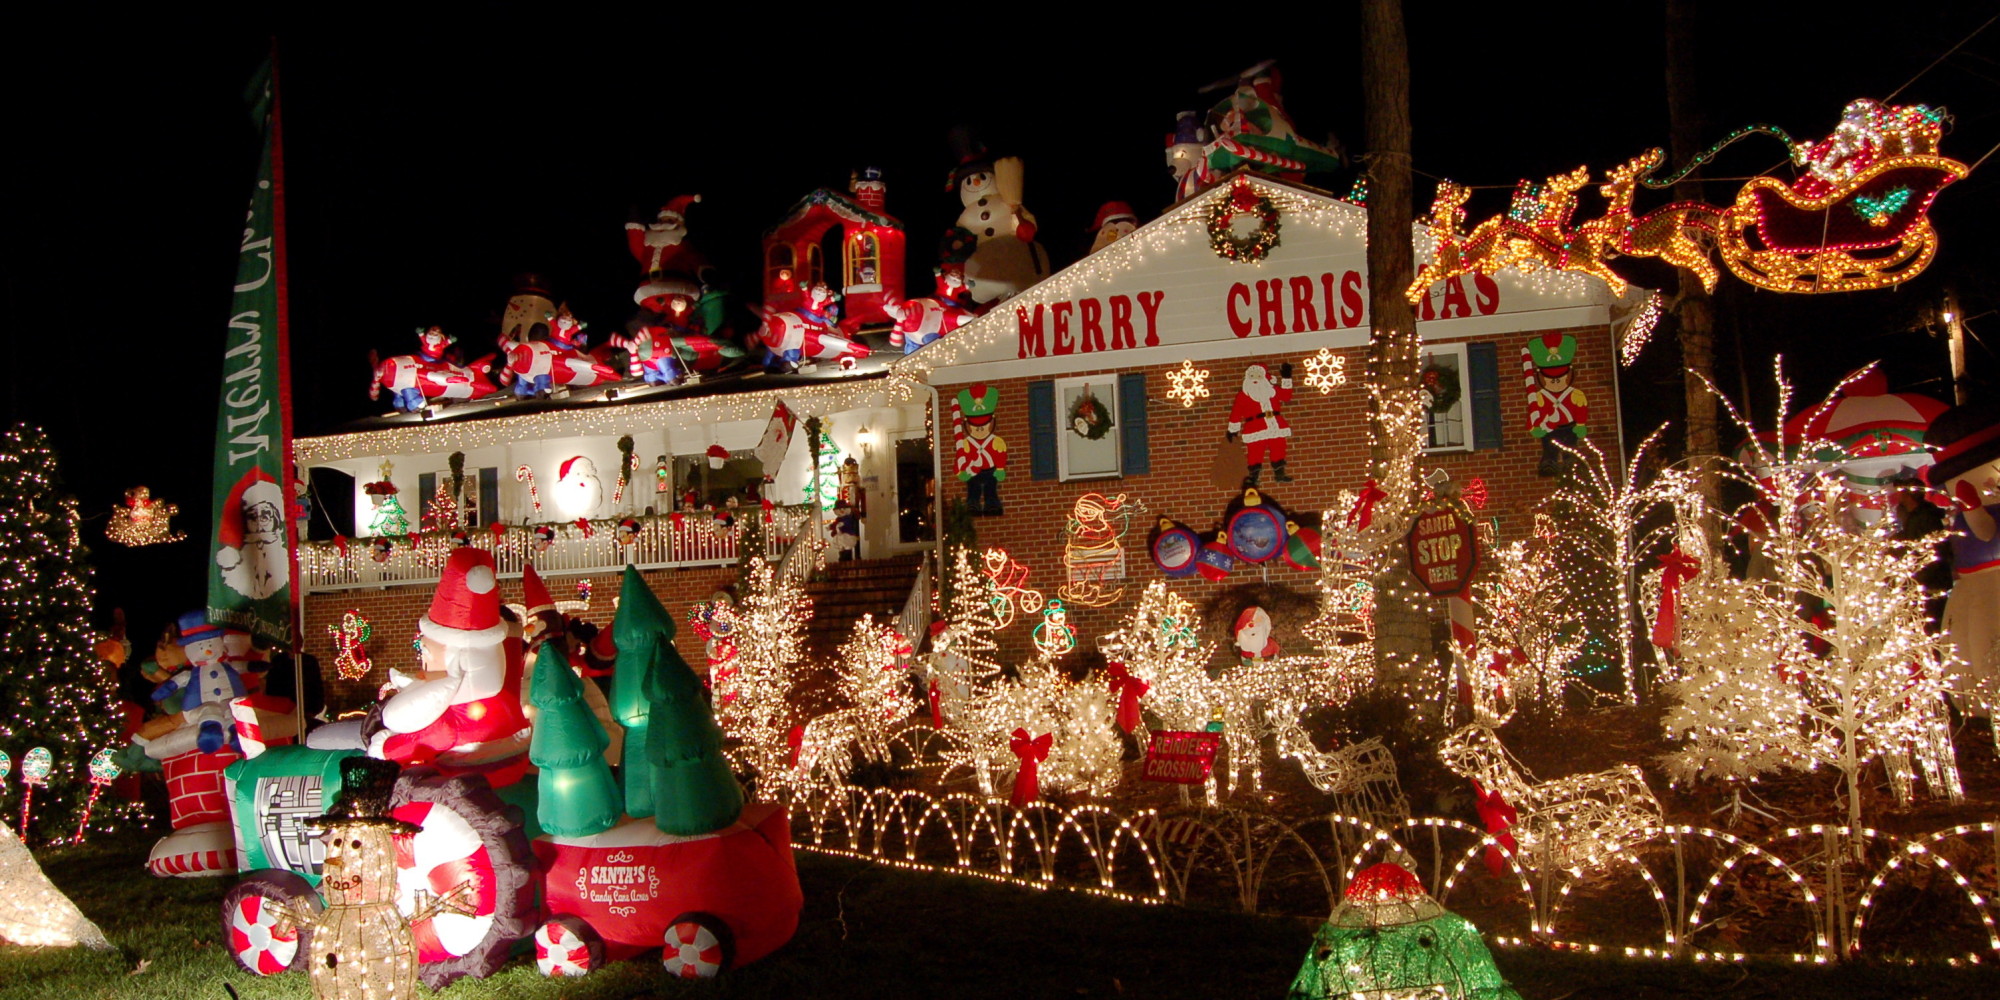 9 Tacky Christmas Decorations That Will Ruin The Holidays | HuffPost